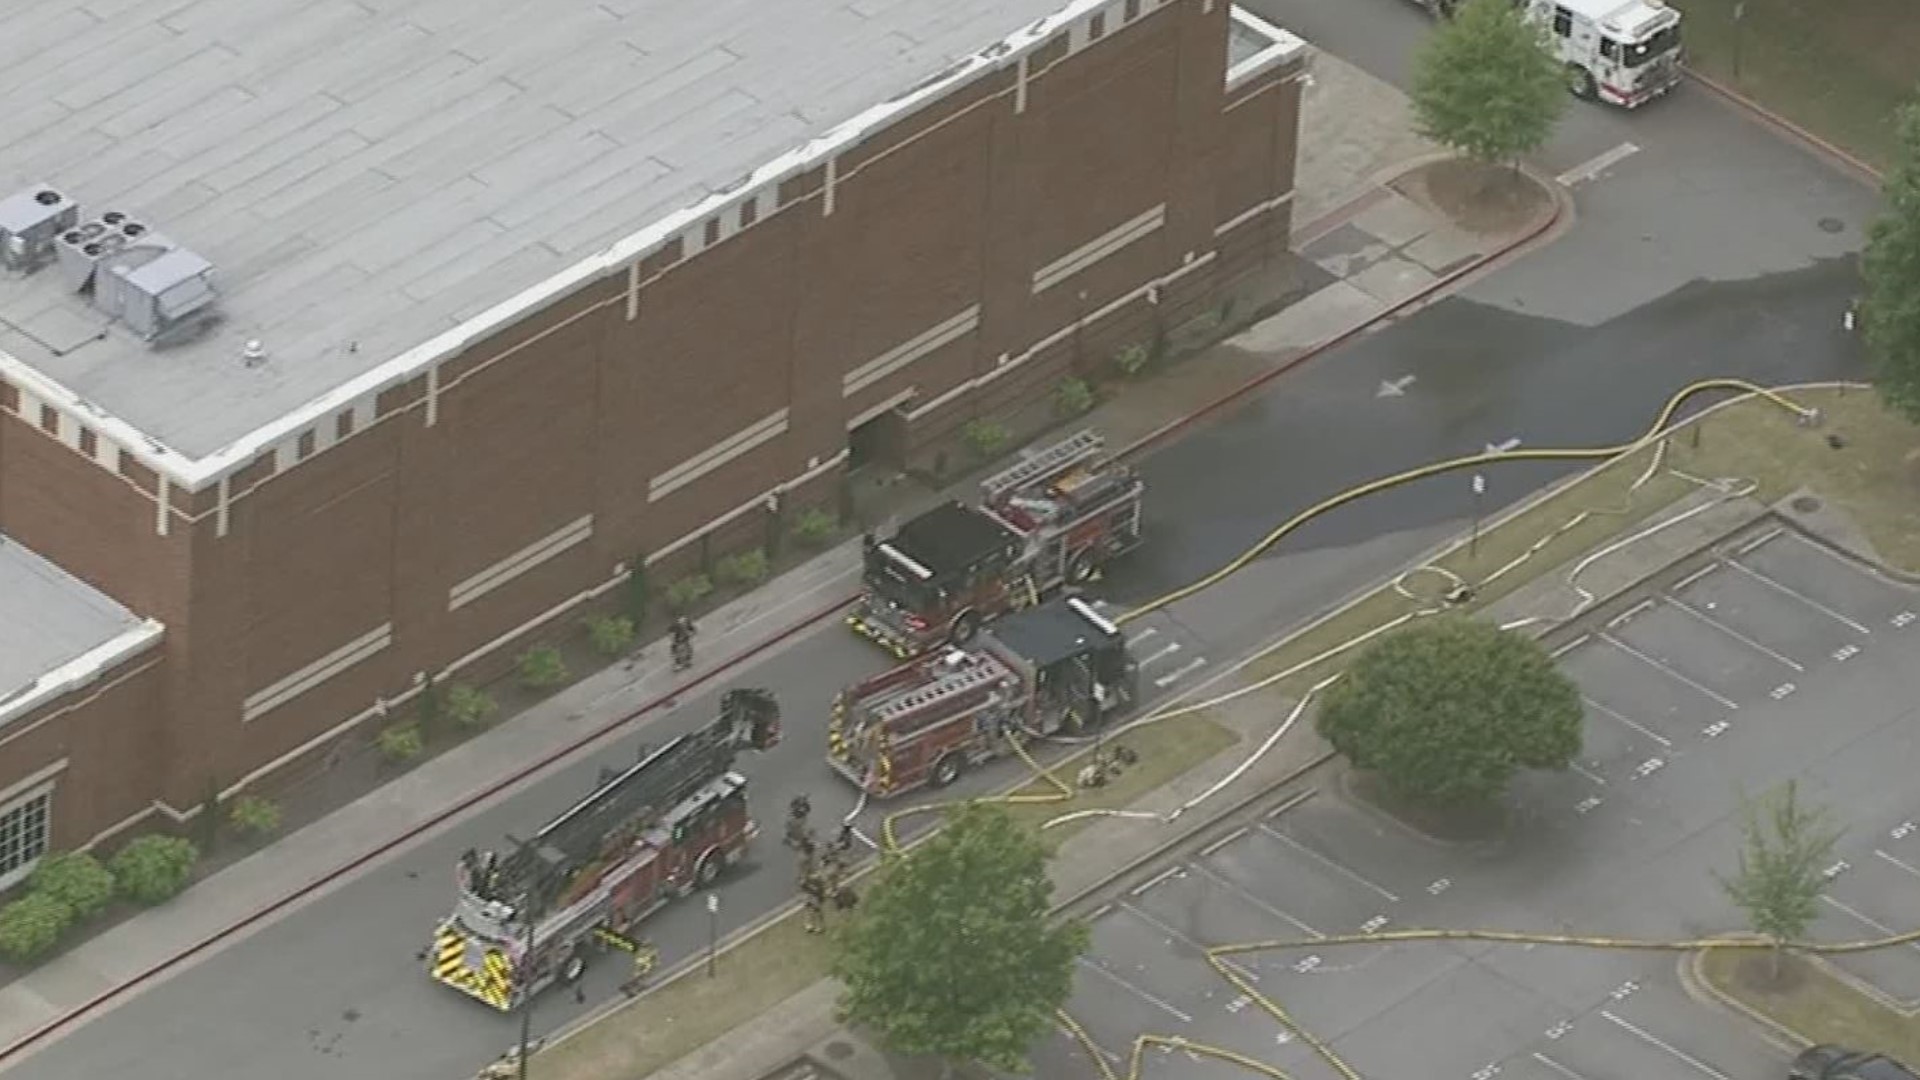 Crews were called to Cambridge High School auditorium Monday after the fire triggered the sprinkler system, according to district officials.